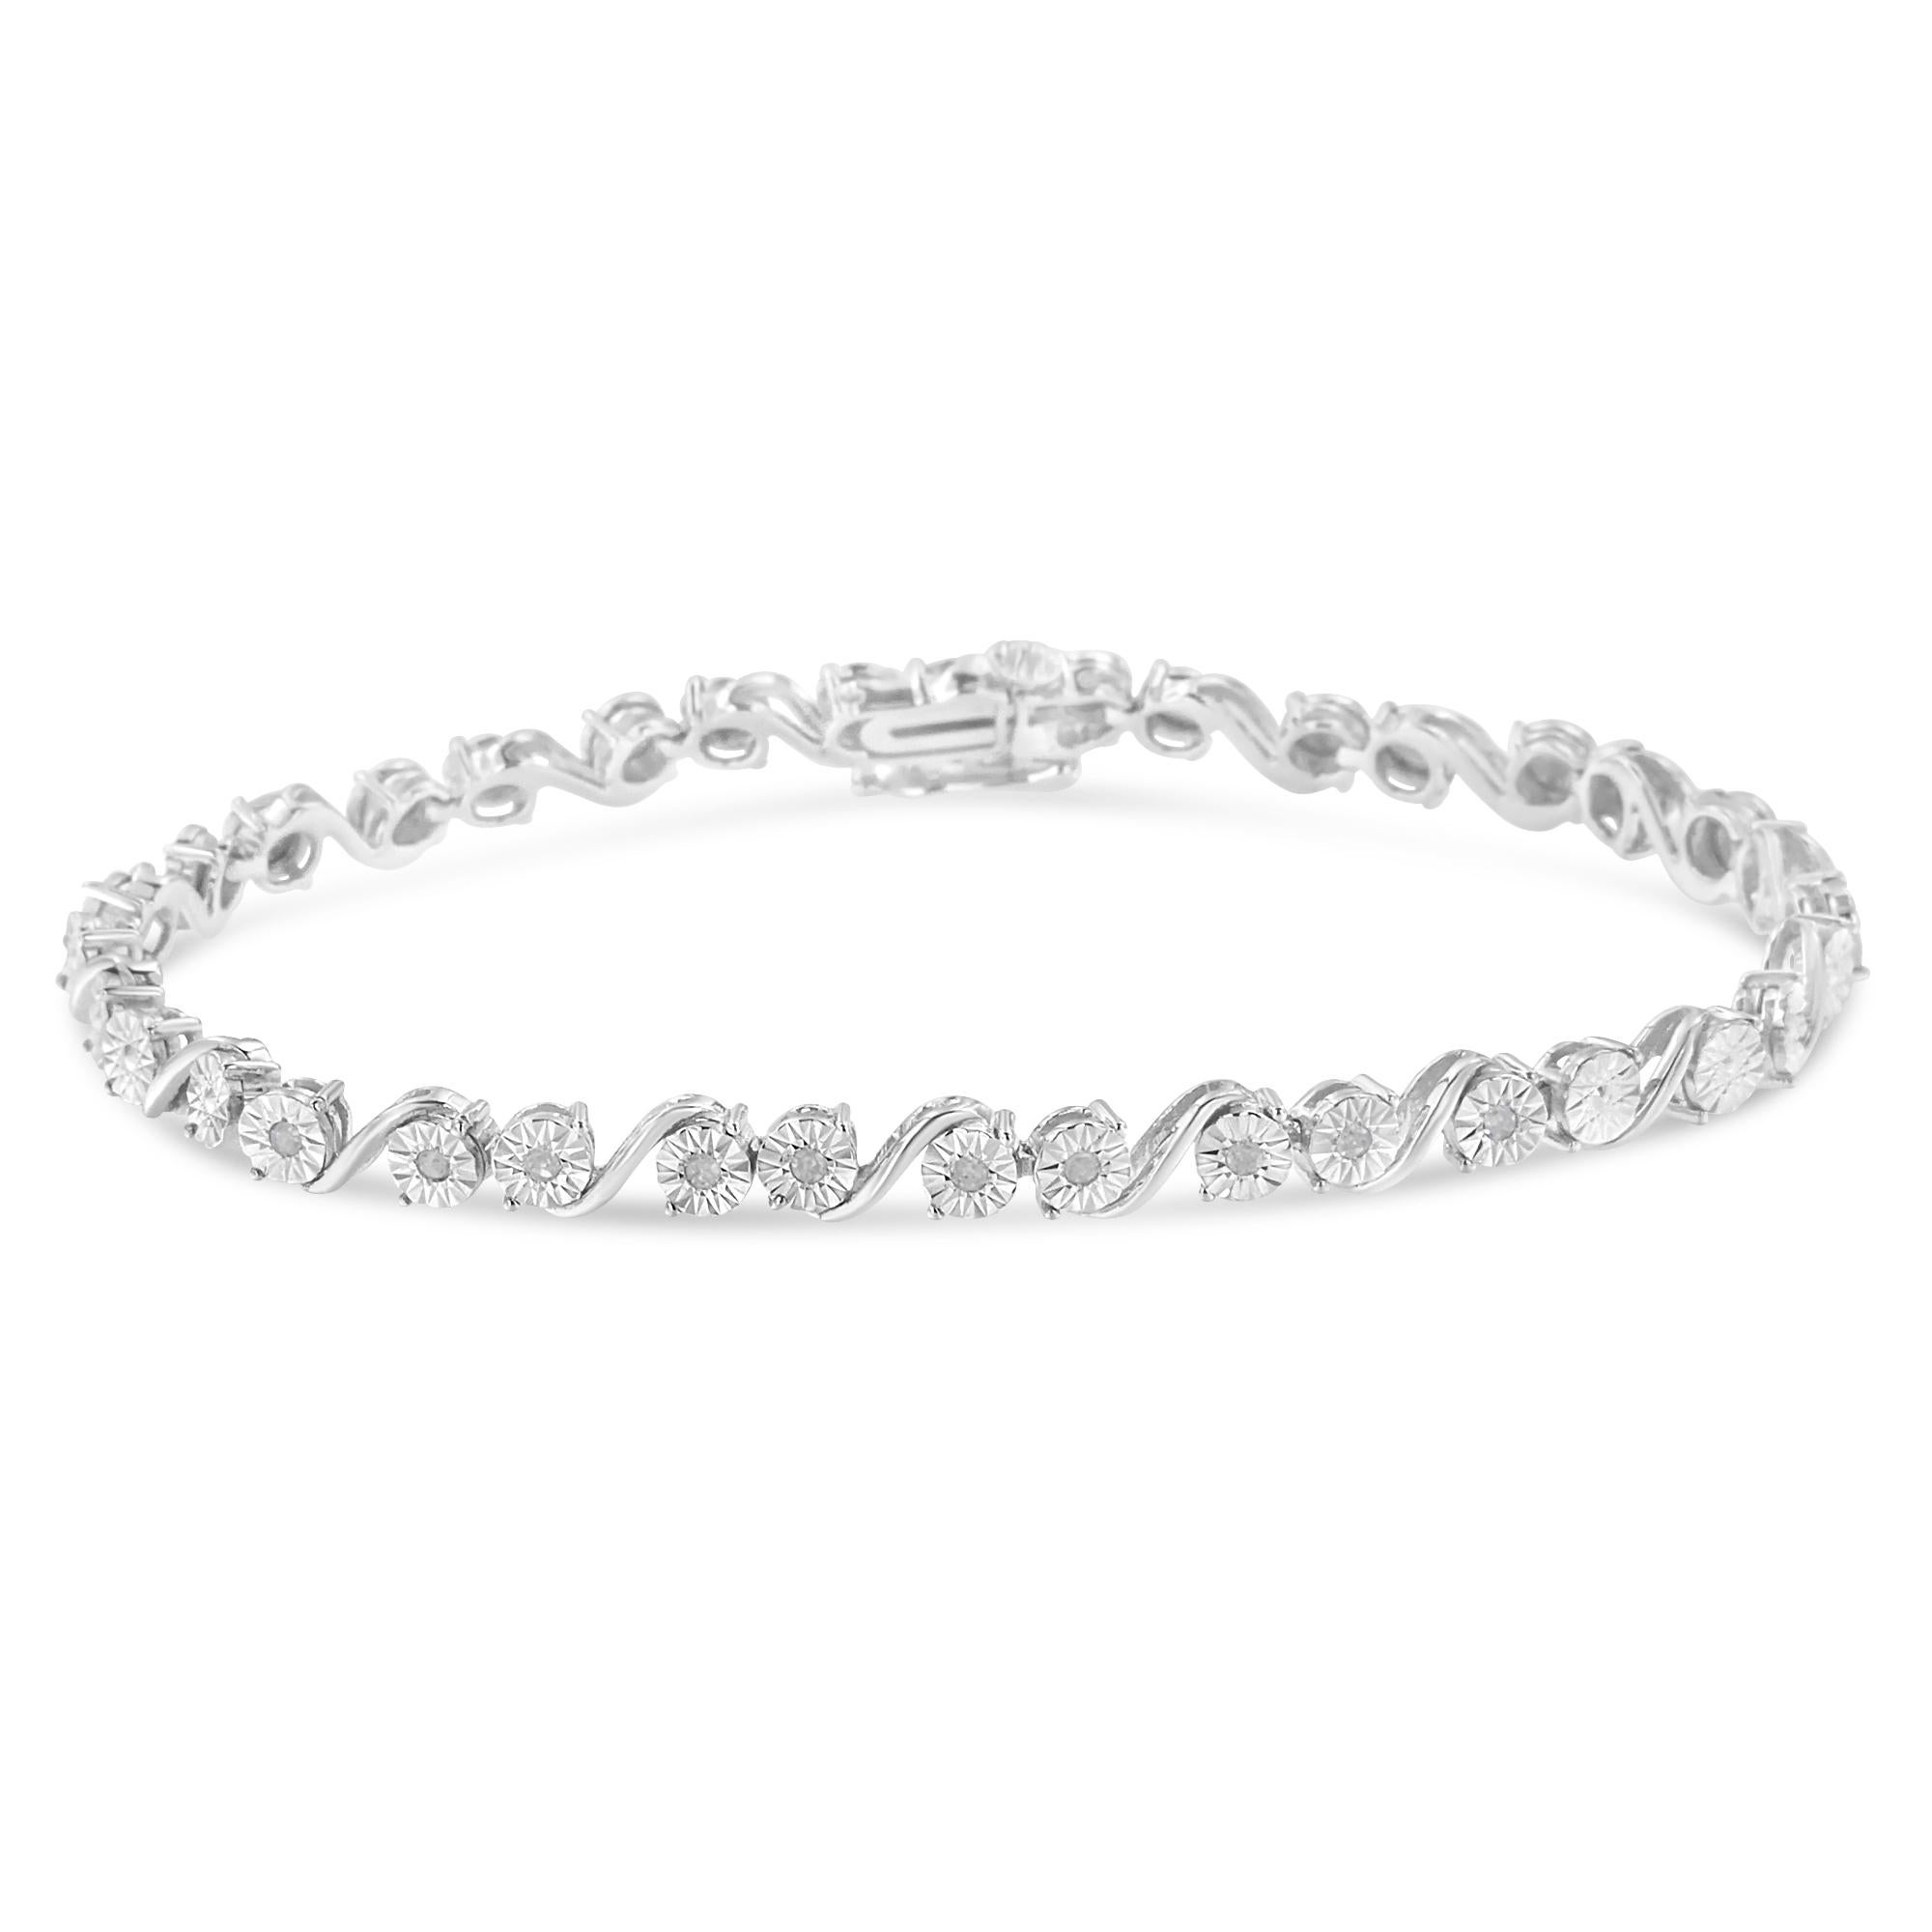 This link bracelet is the quintessence of beauty and elegance. It is crafted from the finest .925 sterling silver, and the miracle setting is embellished with 10 round cut, promo quality diamonds, which are on the lowest on the diamond color and